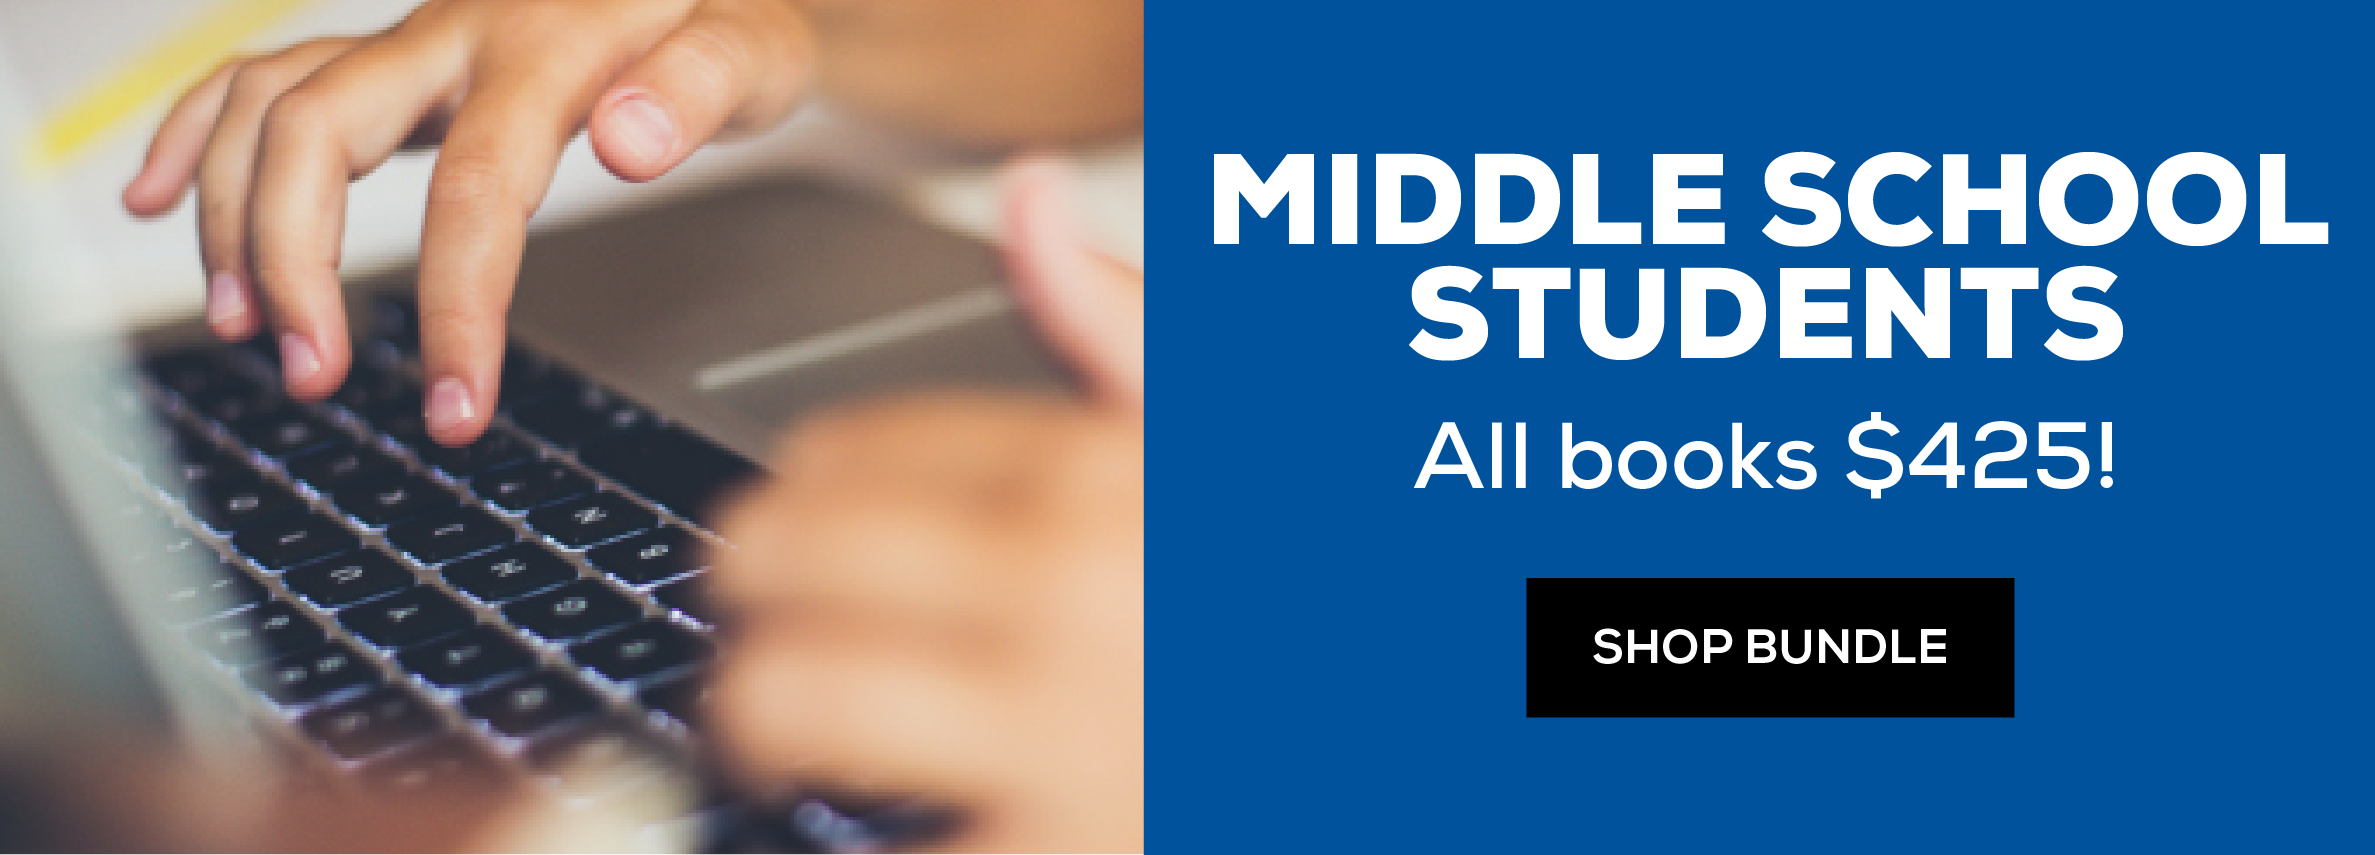 Middle School Students - Bundle All Books $425